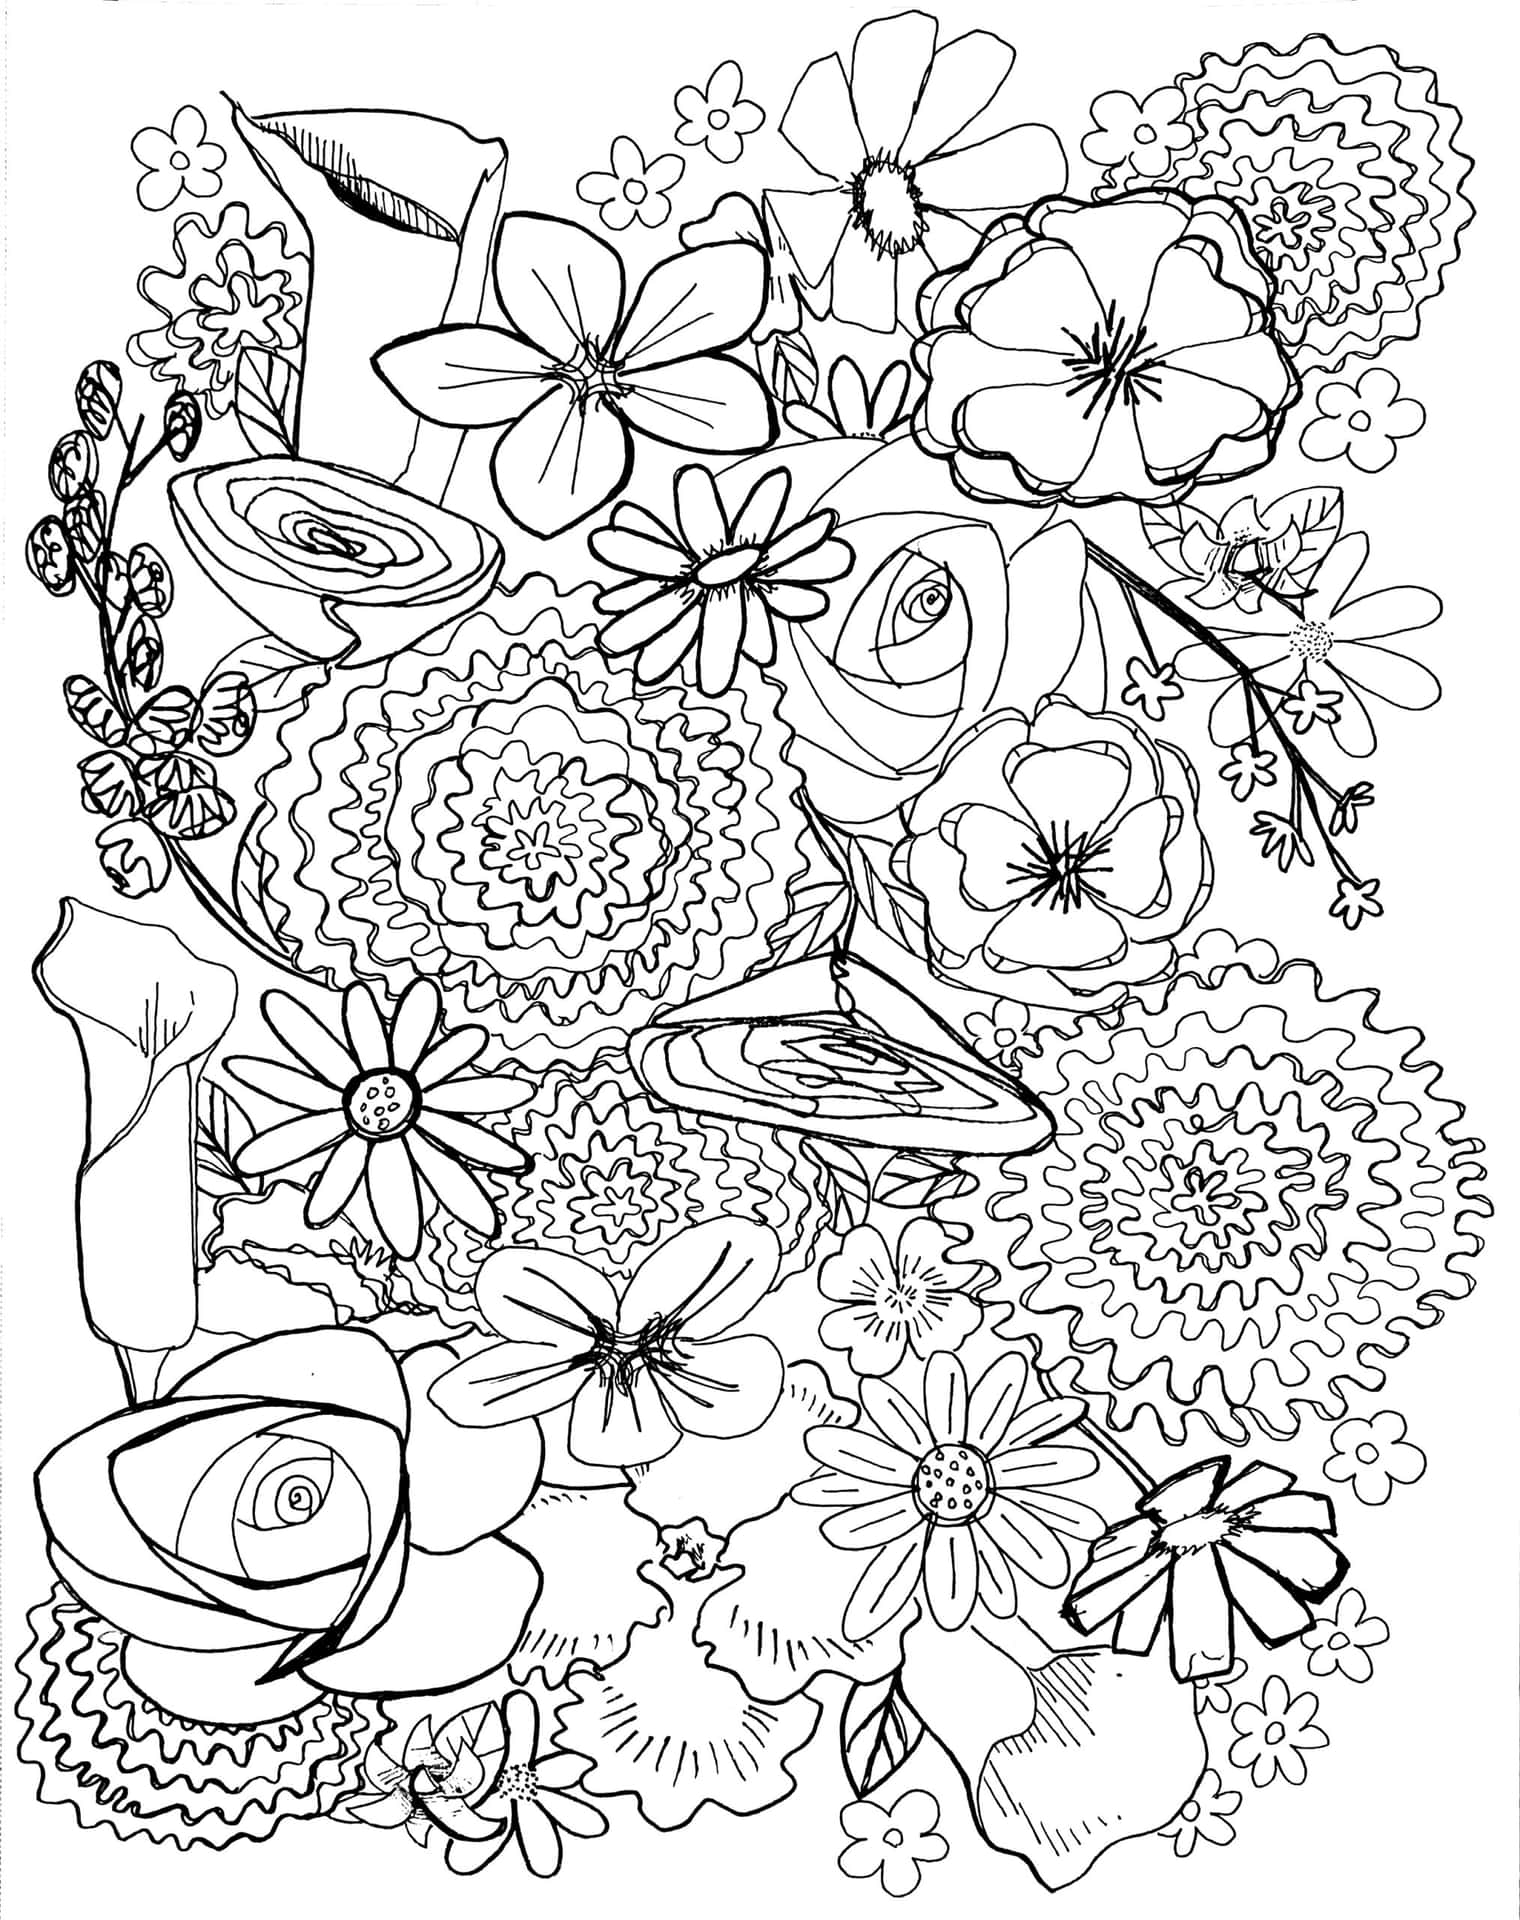 Enjoy the beauty of nature with a flower coloring page